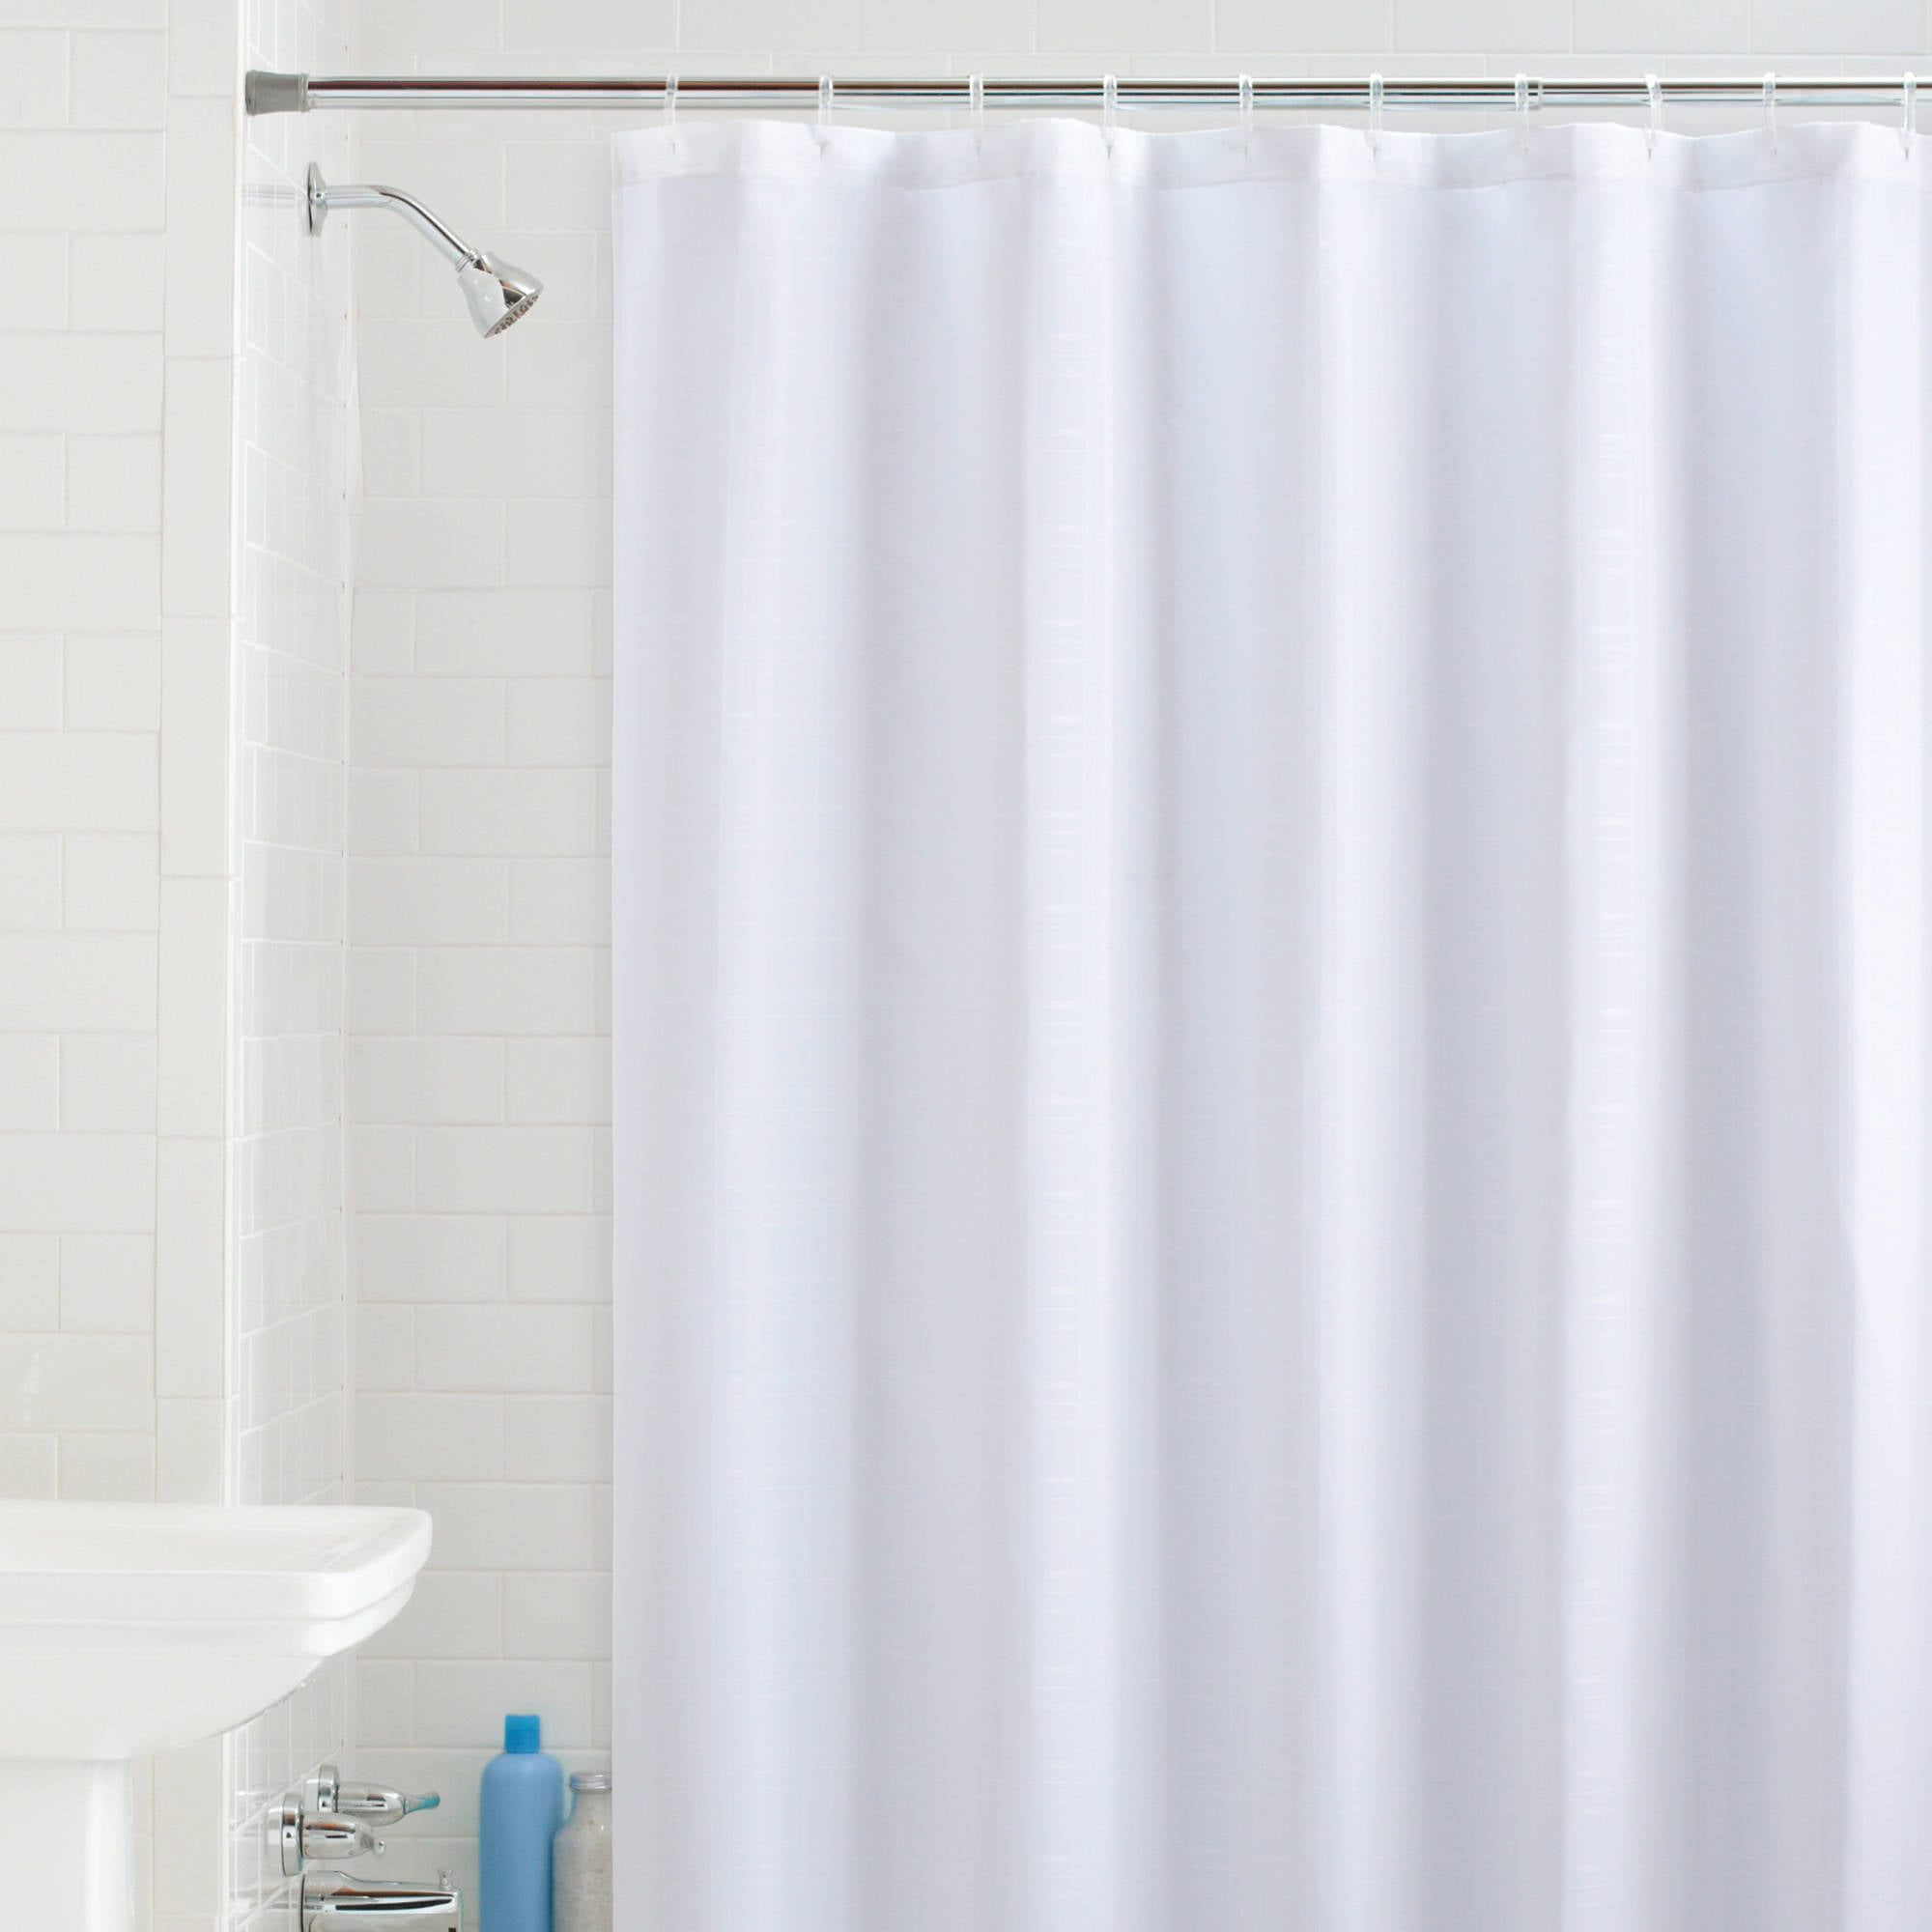 Mildew Resistant Fabric Shower Curtain, Mold Resistant Fabric Shower Curtain